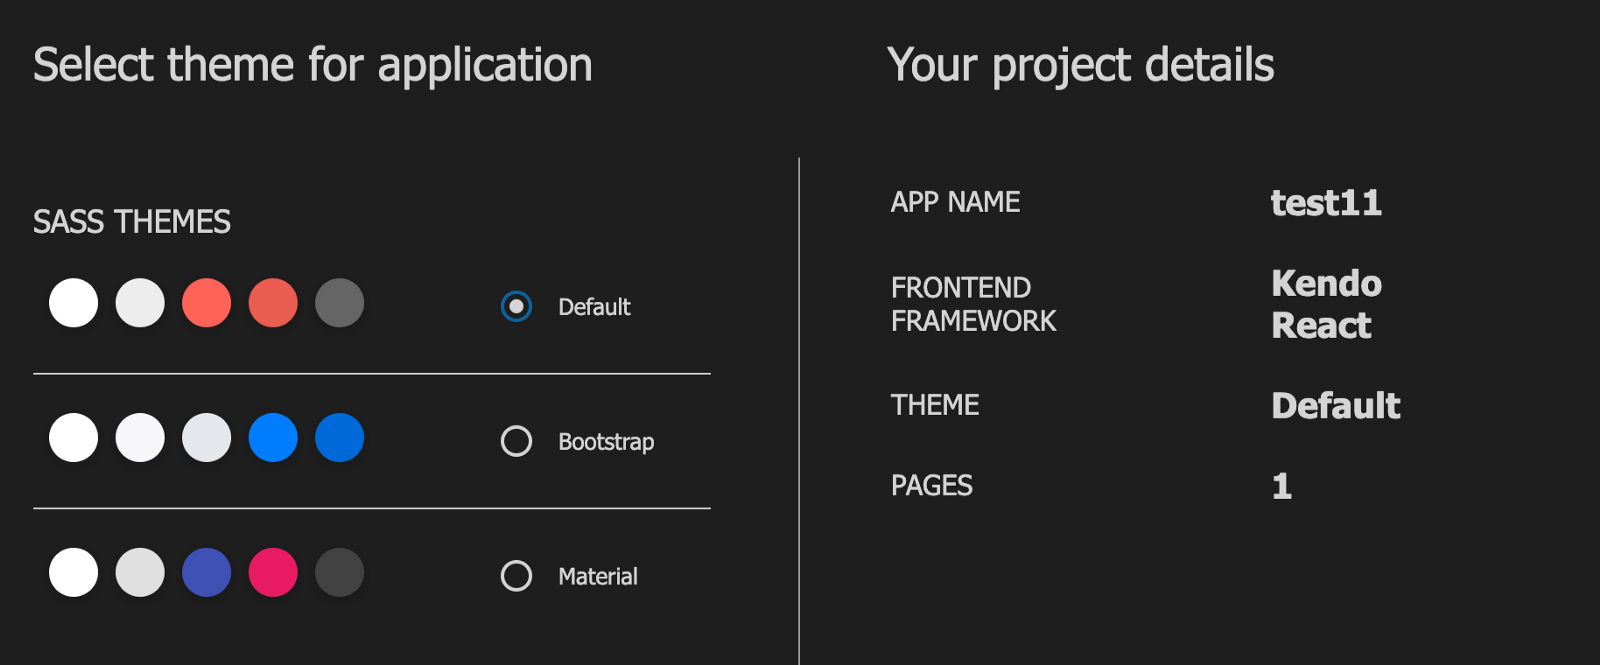 We visually skipped step 3, add pages. This is step 4: Add Theme. ‘Select theme for application’ has options for Default, Bootstrap and Material. Default is selected. ‘Your project details’ lists App name - test11, frontend framework - KendoReact, Theme - Default, Pages - 1.